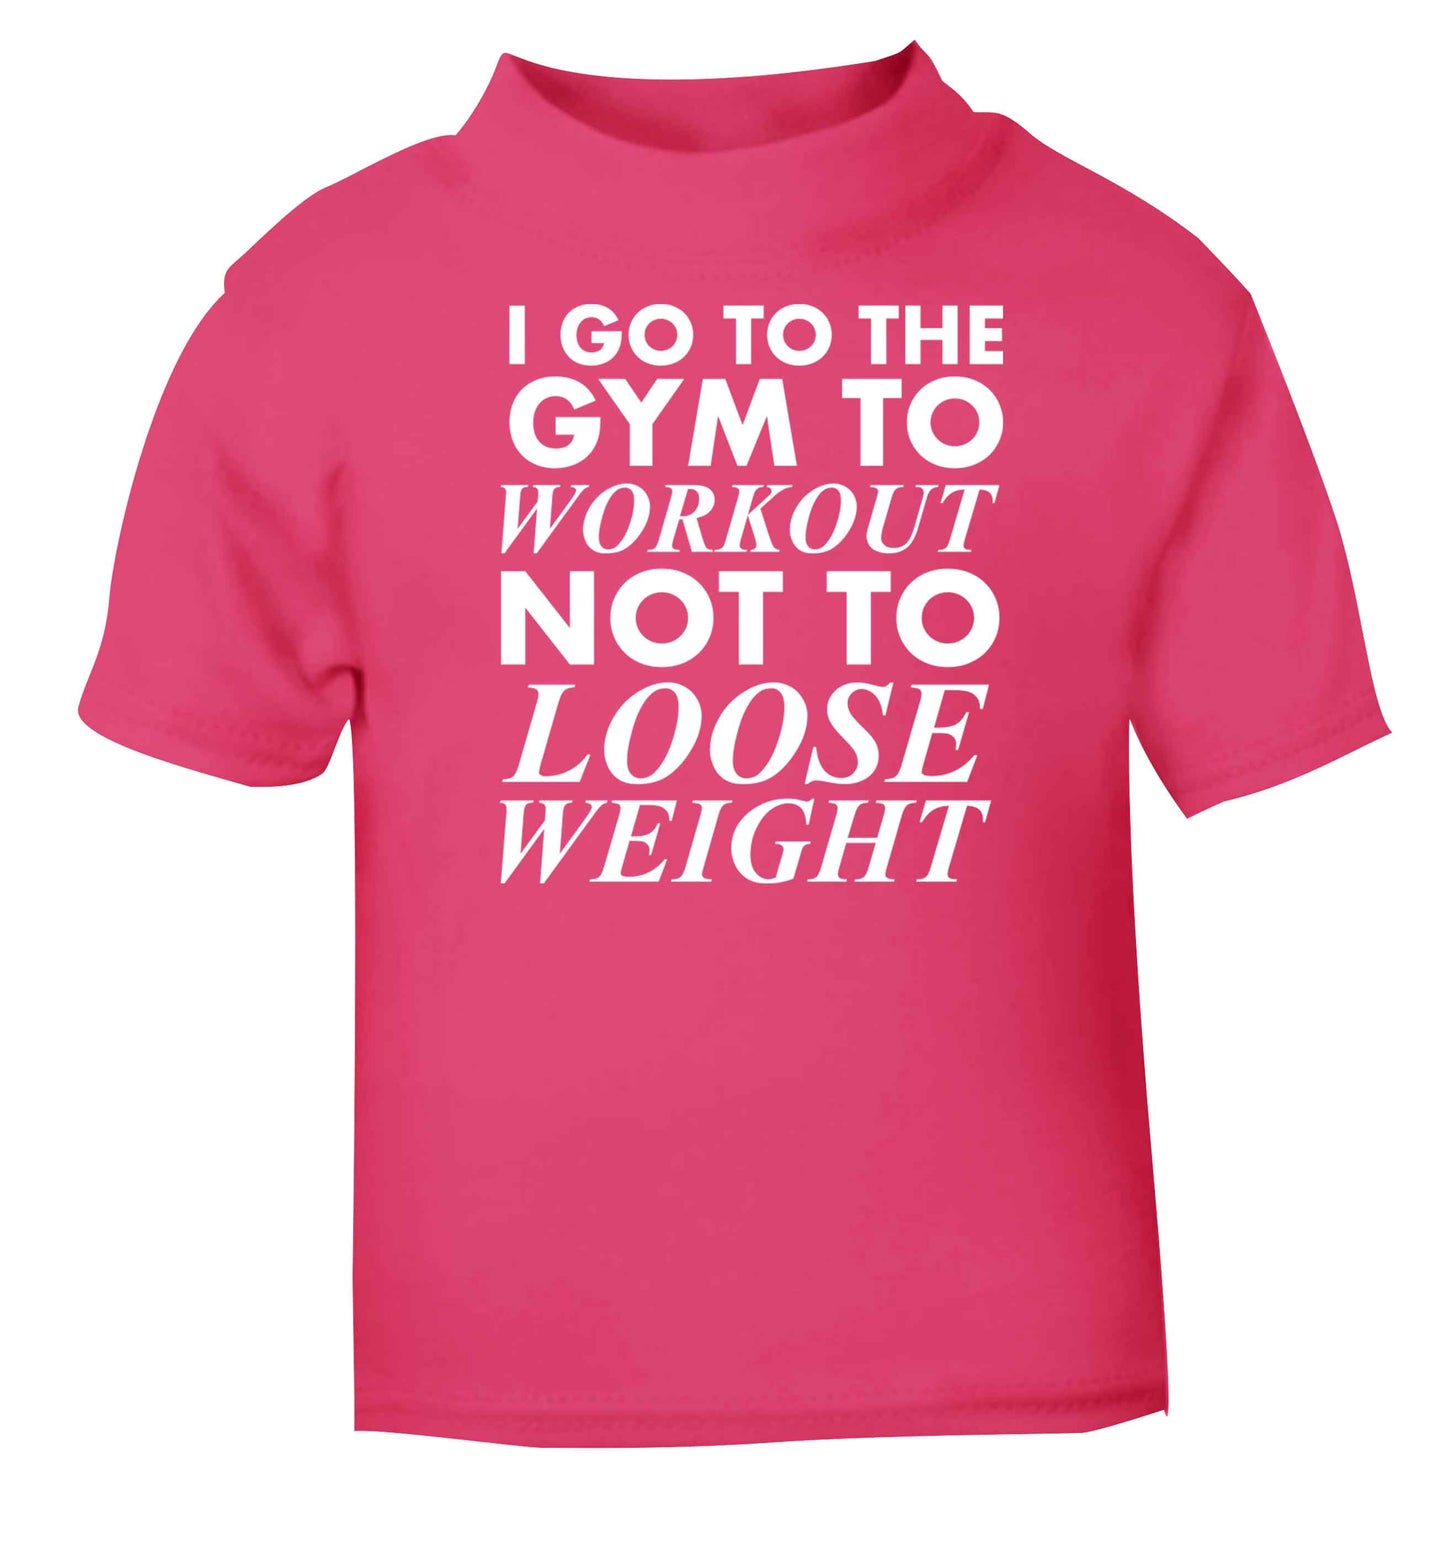 I go to the gym to workout not to loose weight pink baby toddler Tshirt 2 Years